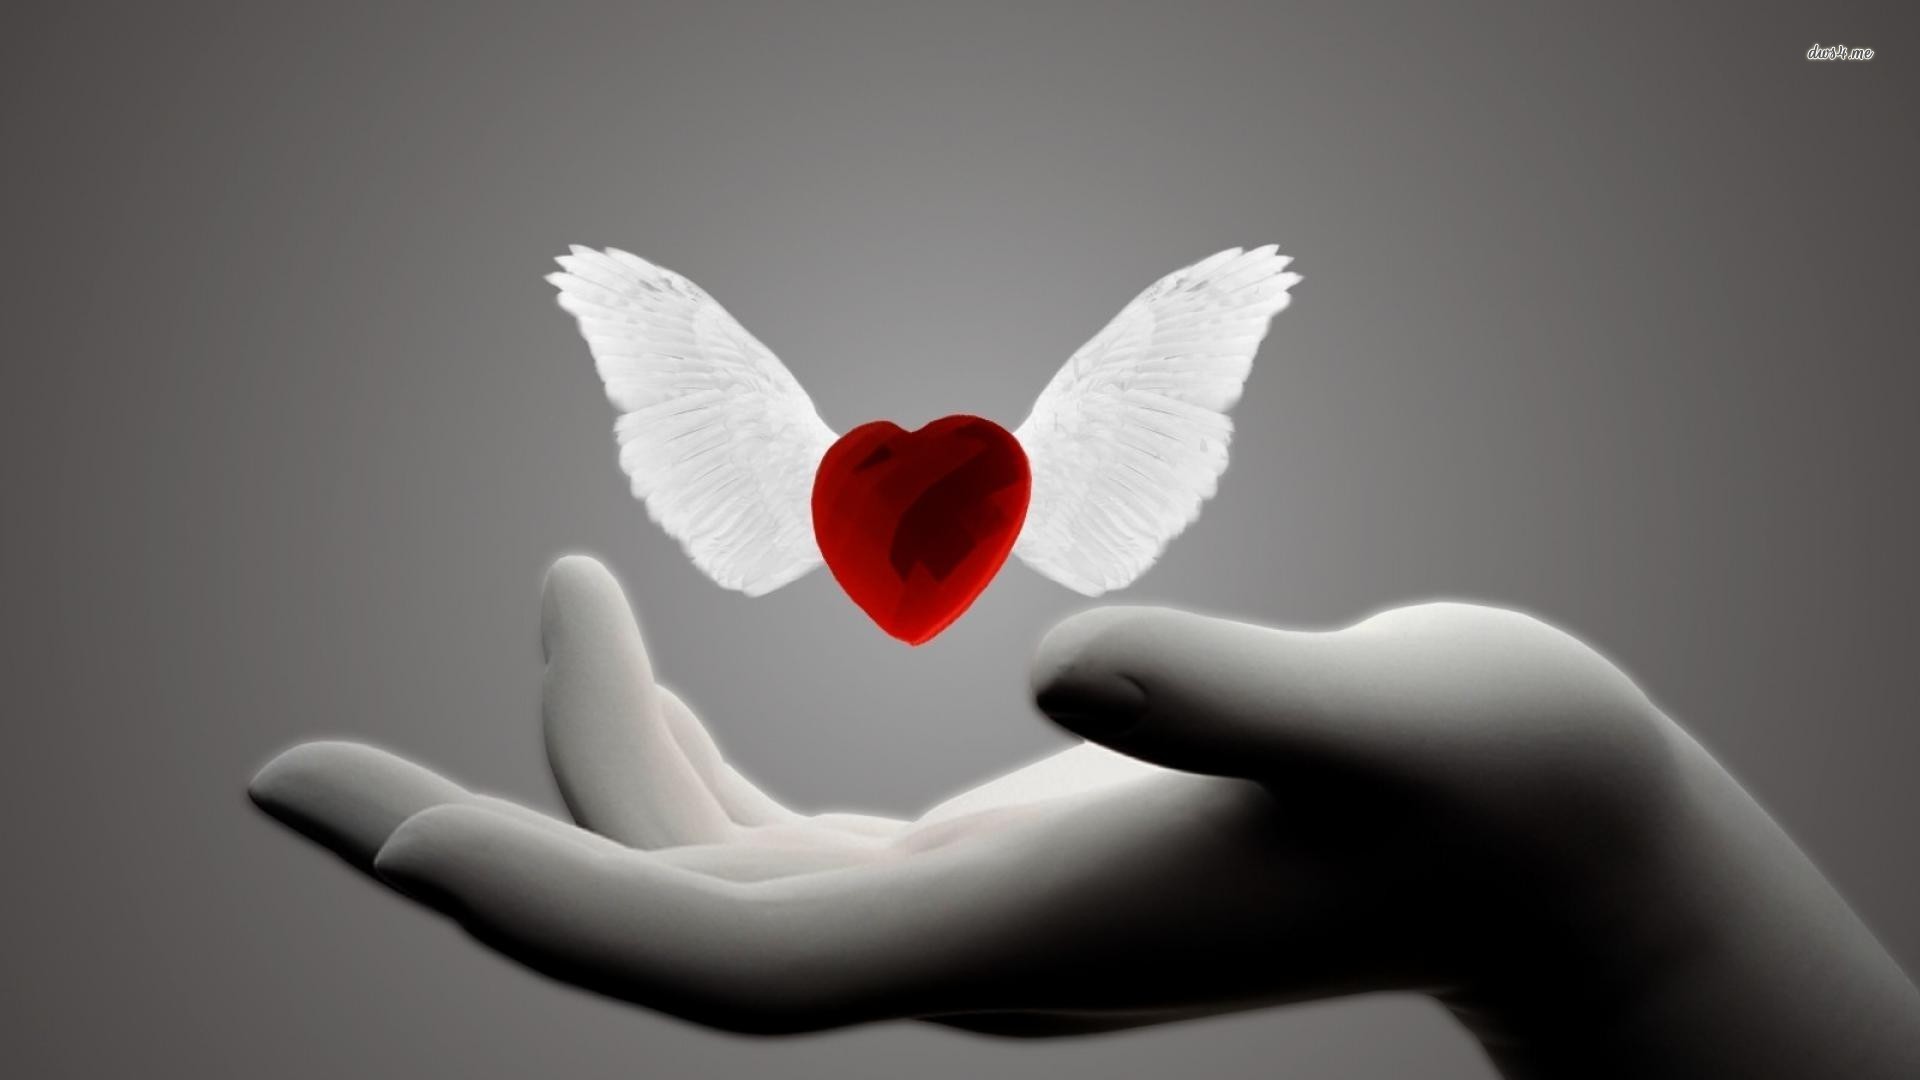 1920x1080 ... Heart with wings wallpaper  ...